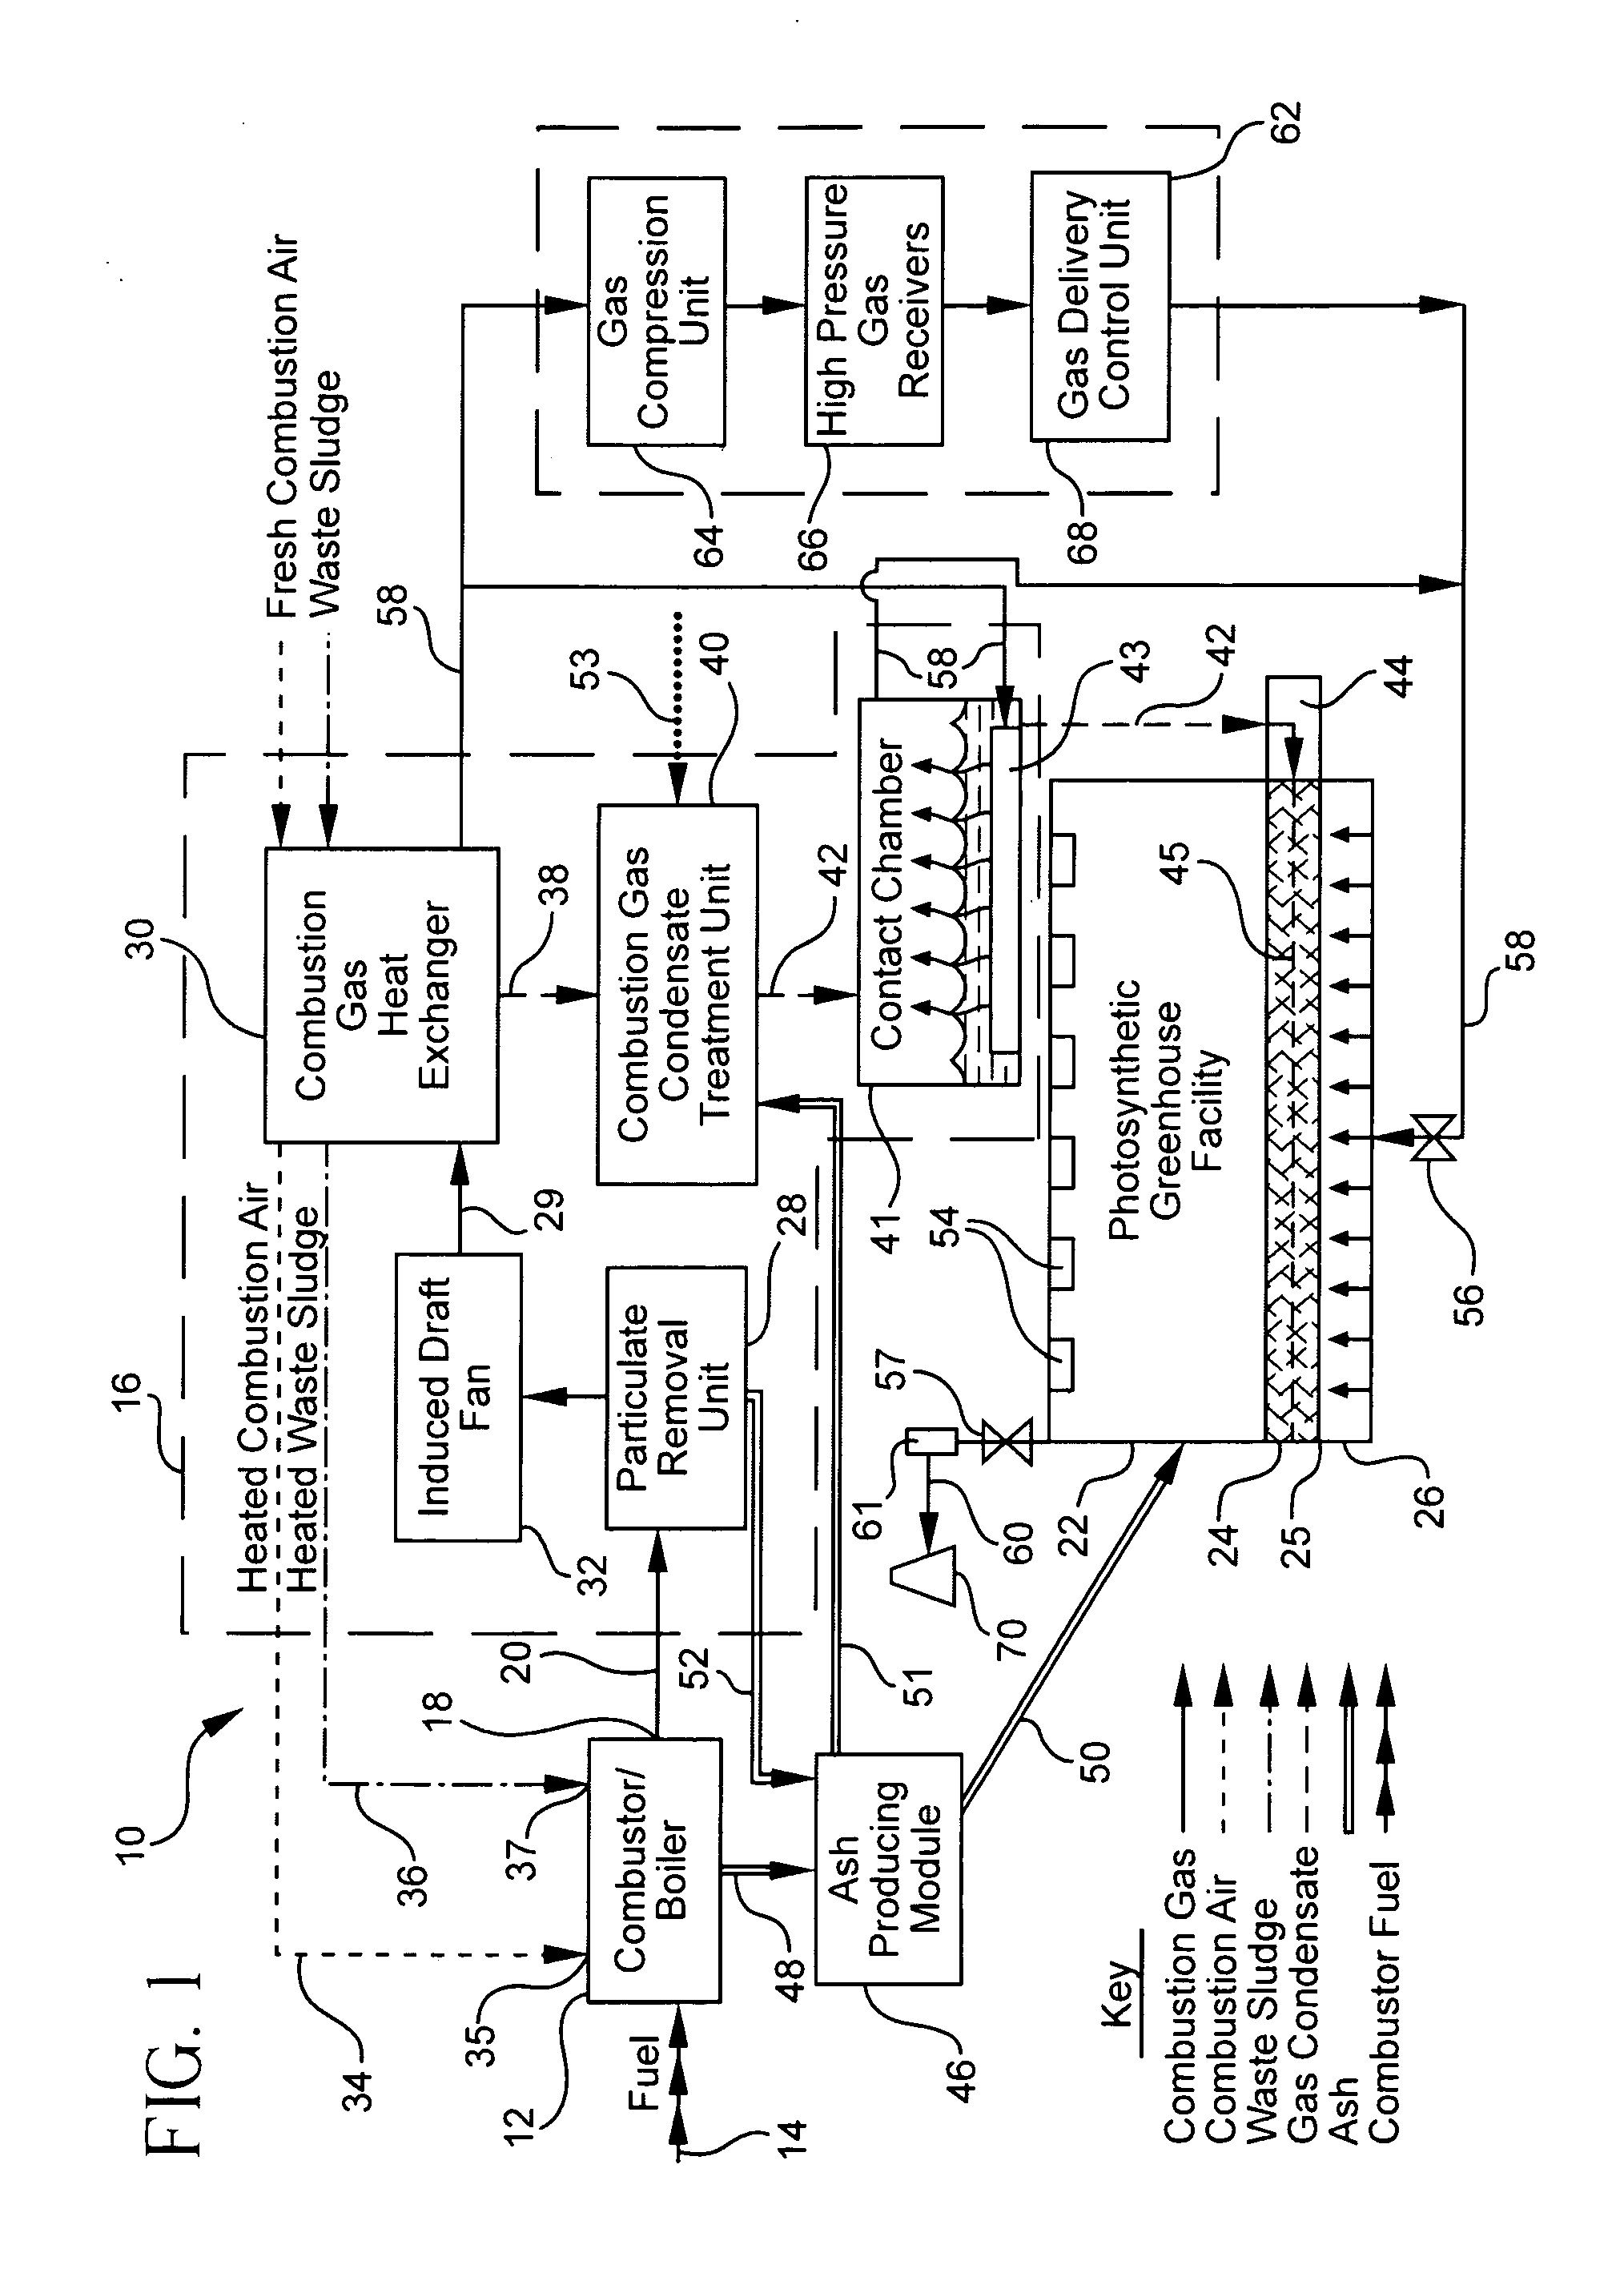 Method and system for sequestering carbon emissions from a combustor/boiler